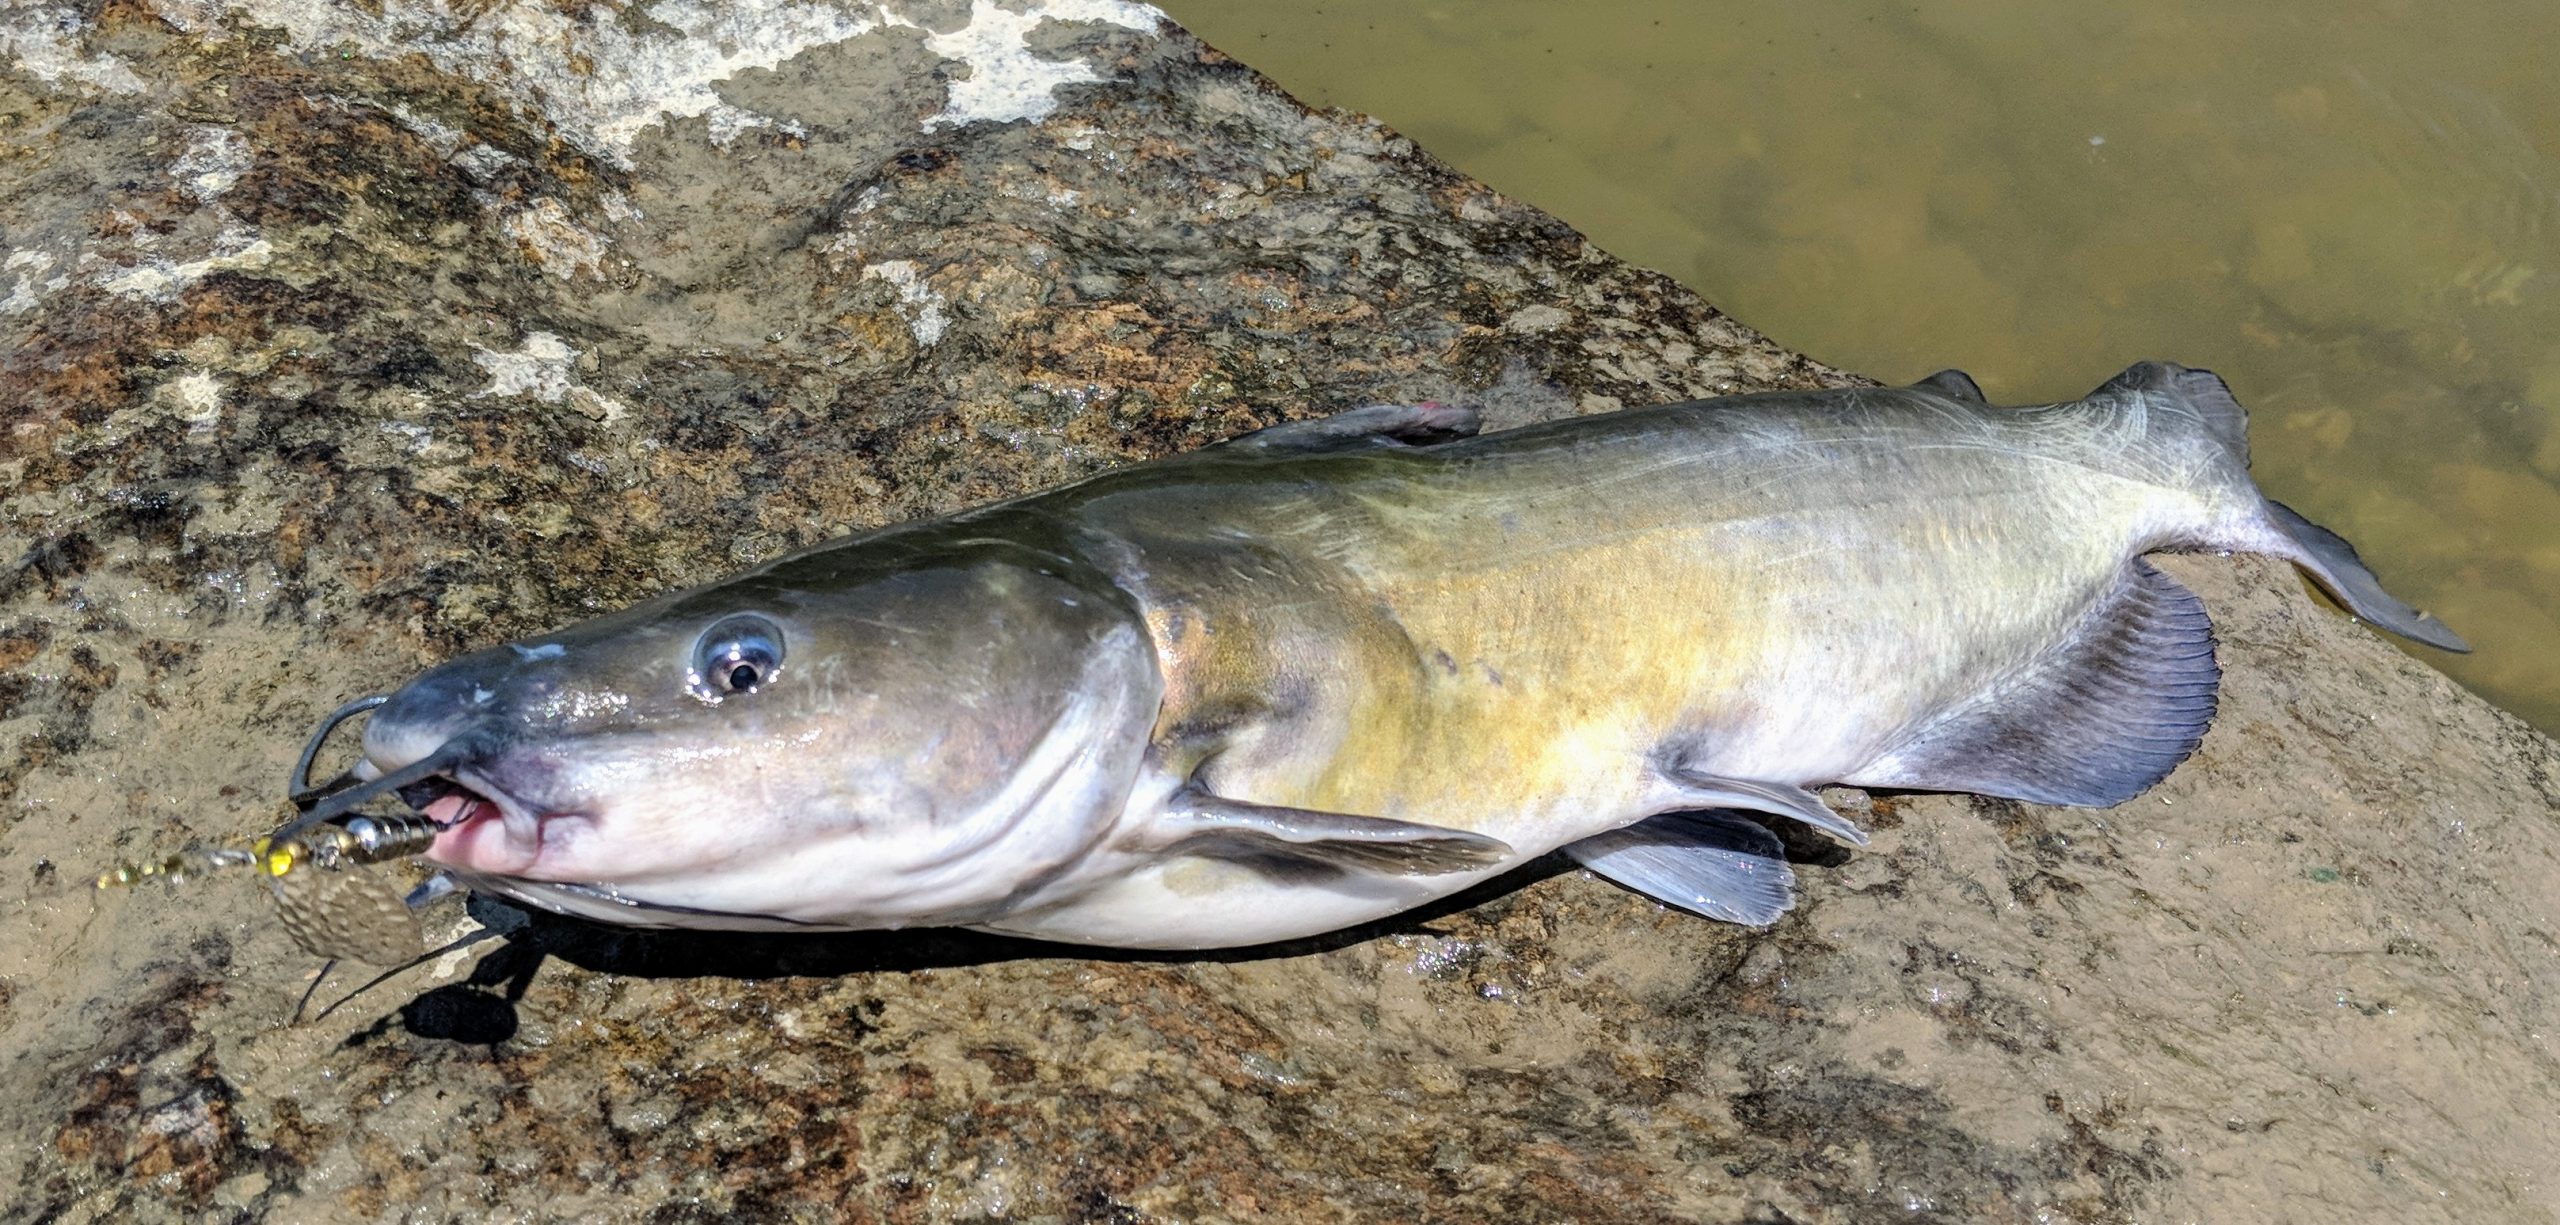 Maumee river report- July 25, 2020-Frozen Emerald shiners available